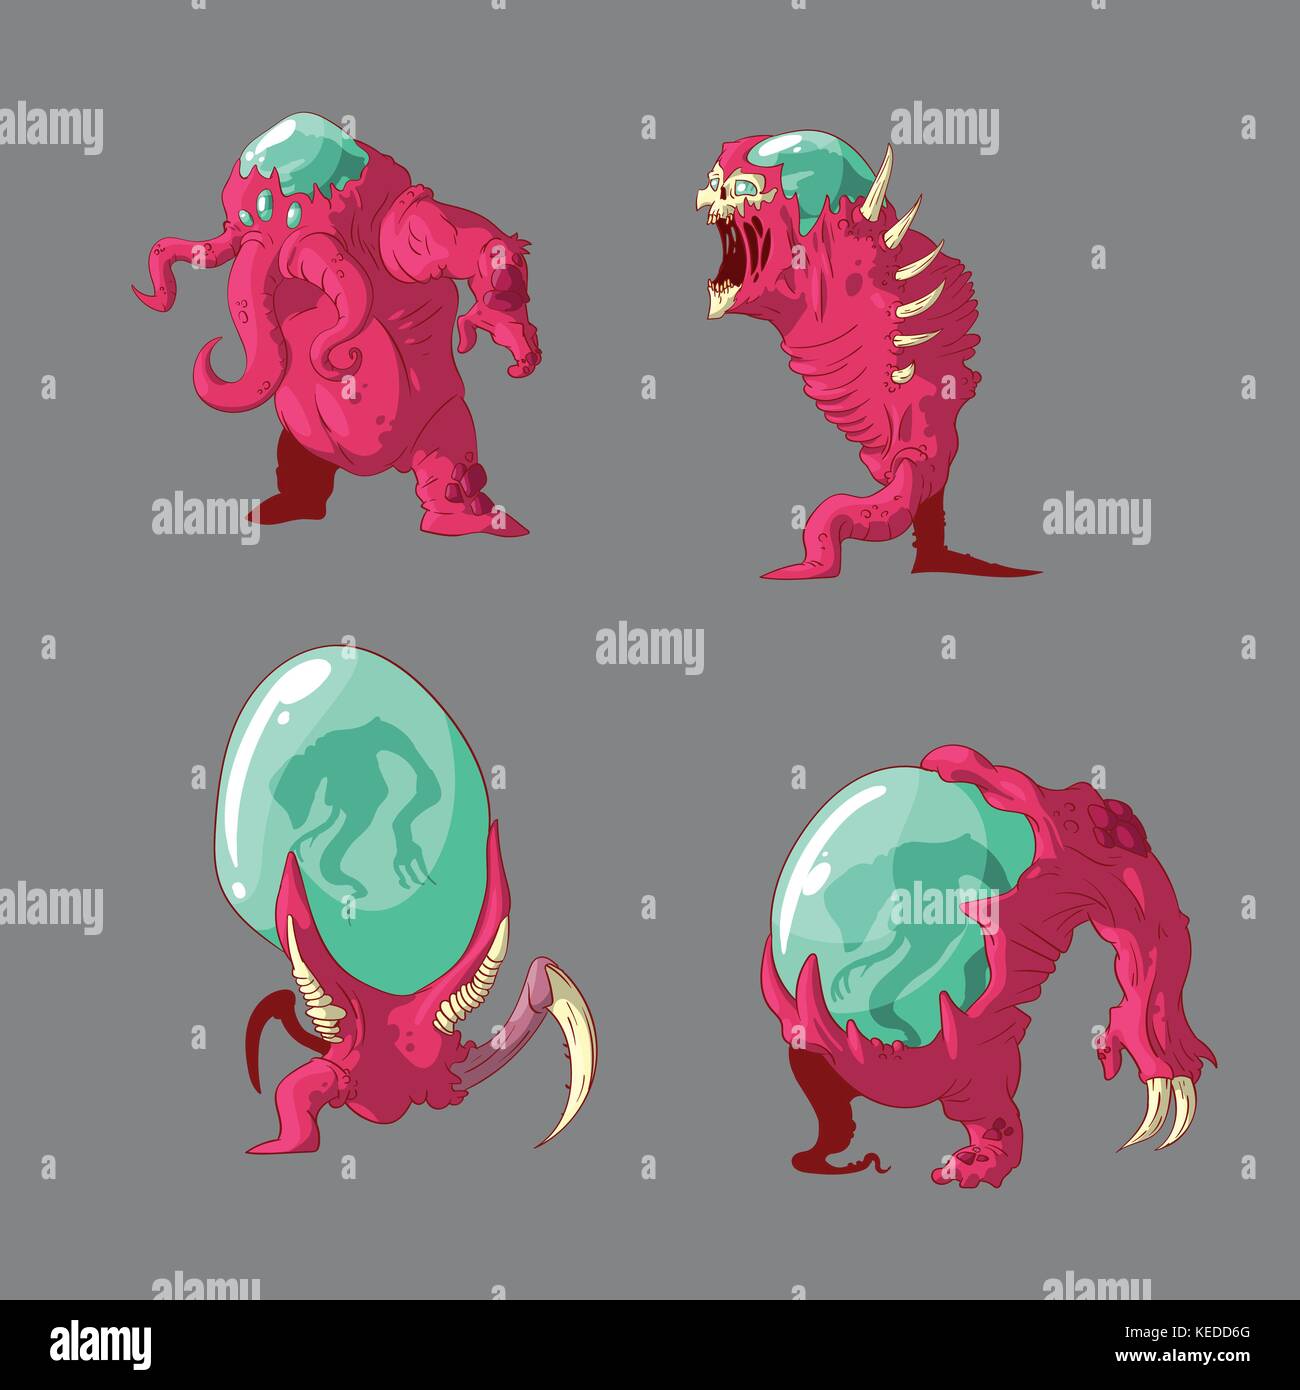 Collection of colorful vector illustrations of alien mutant monsters Stock Vector